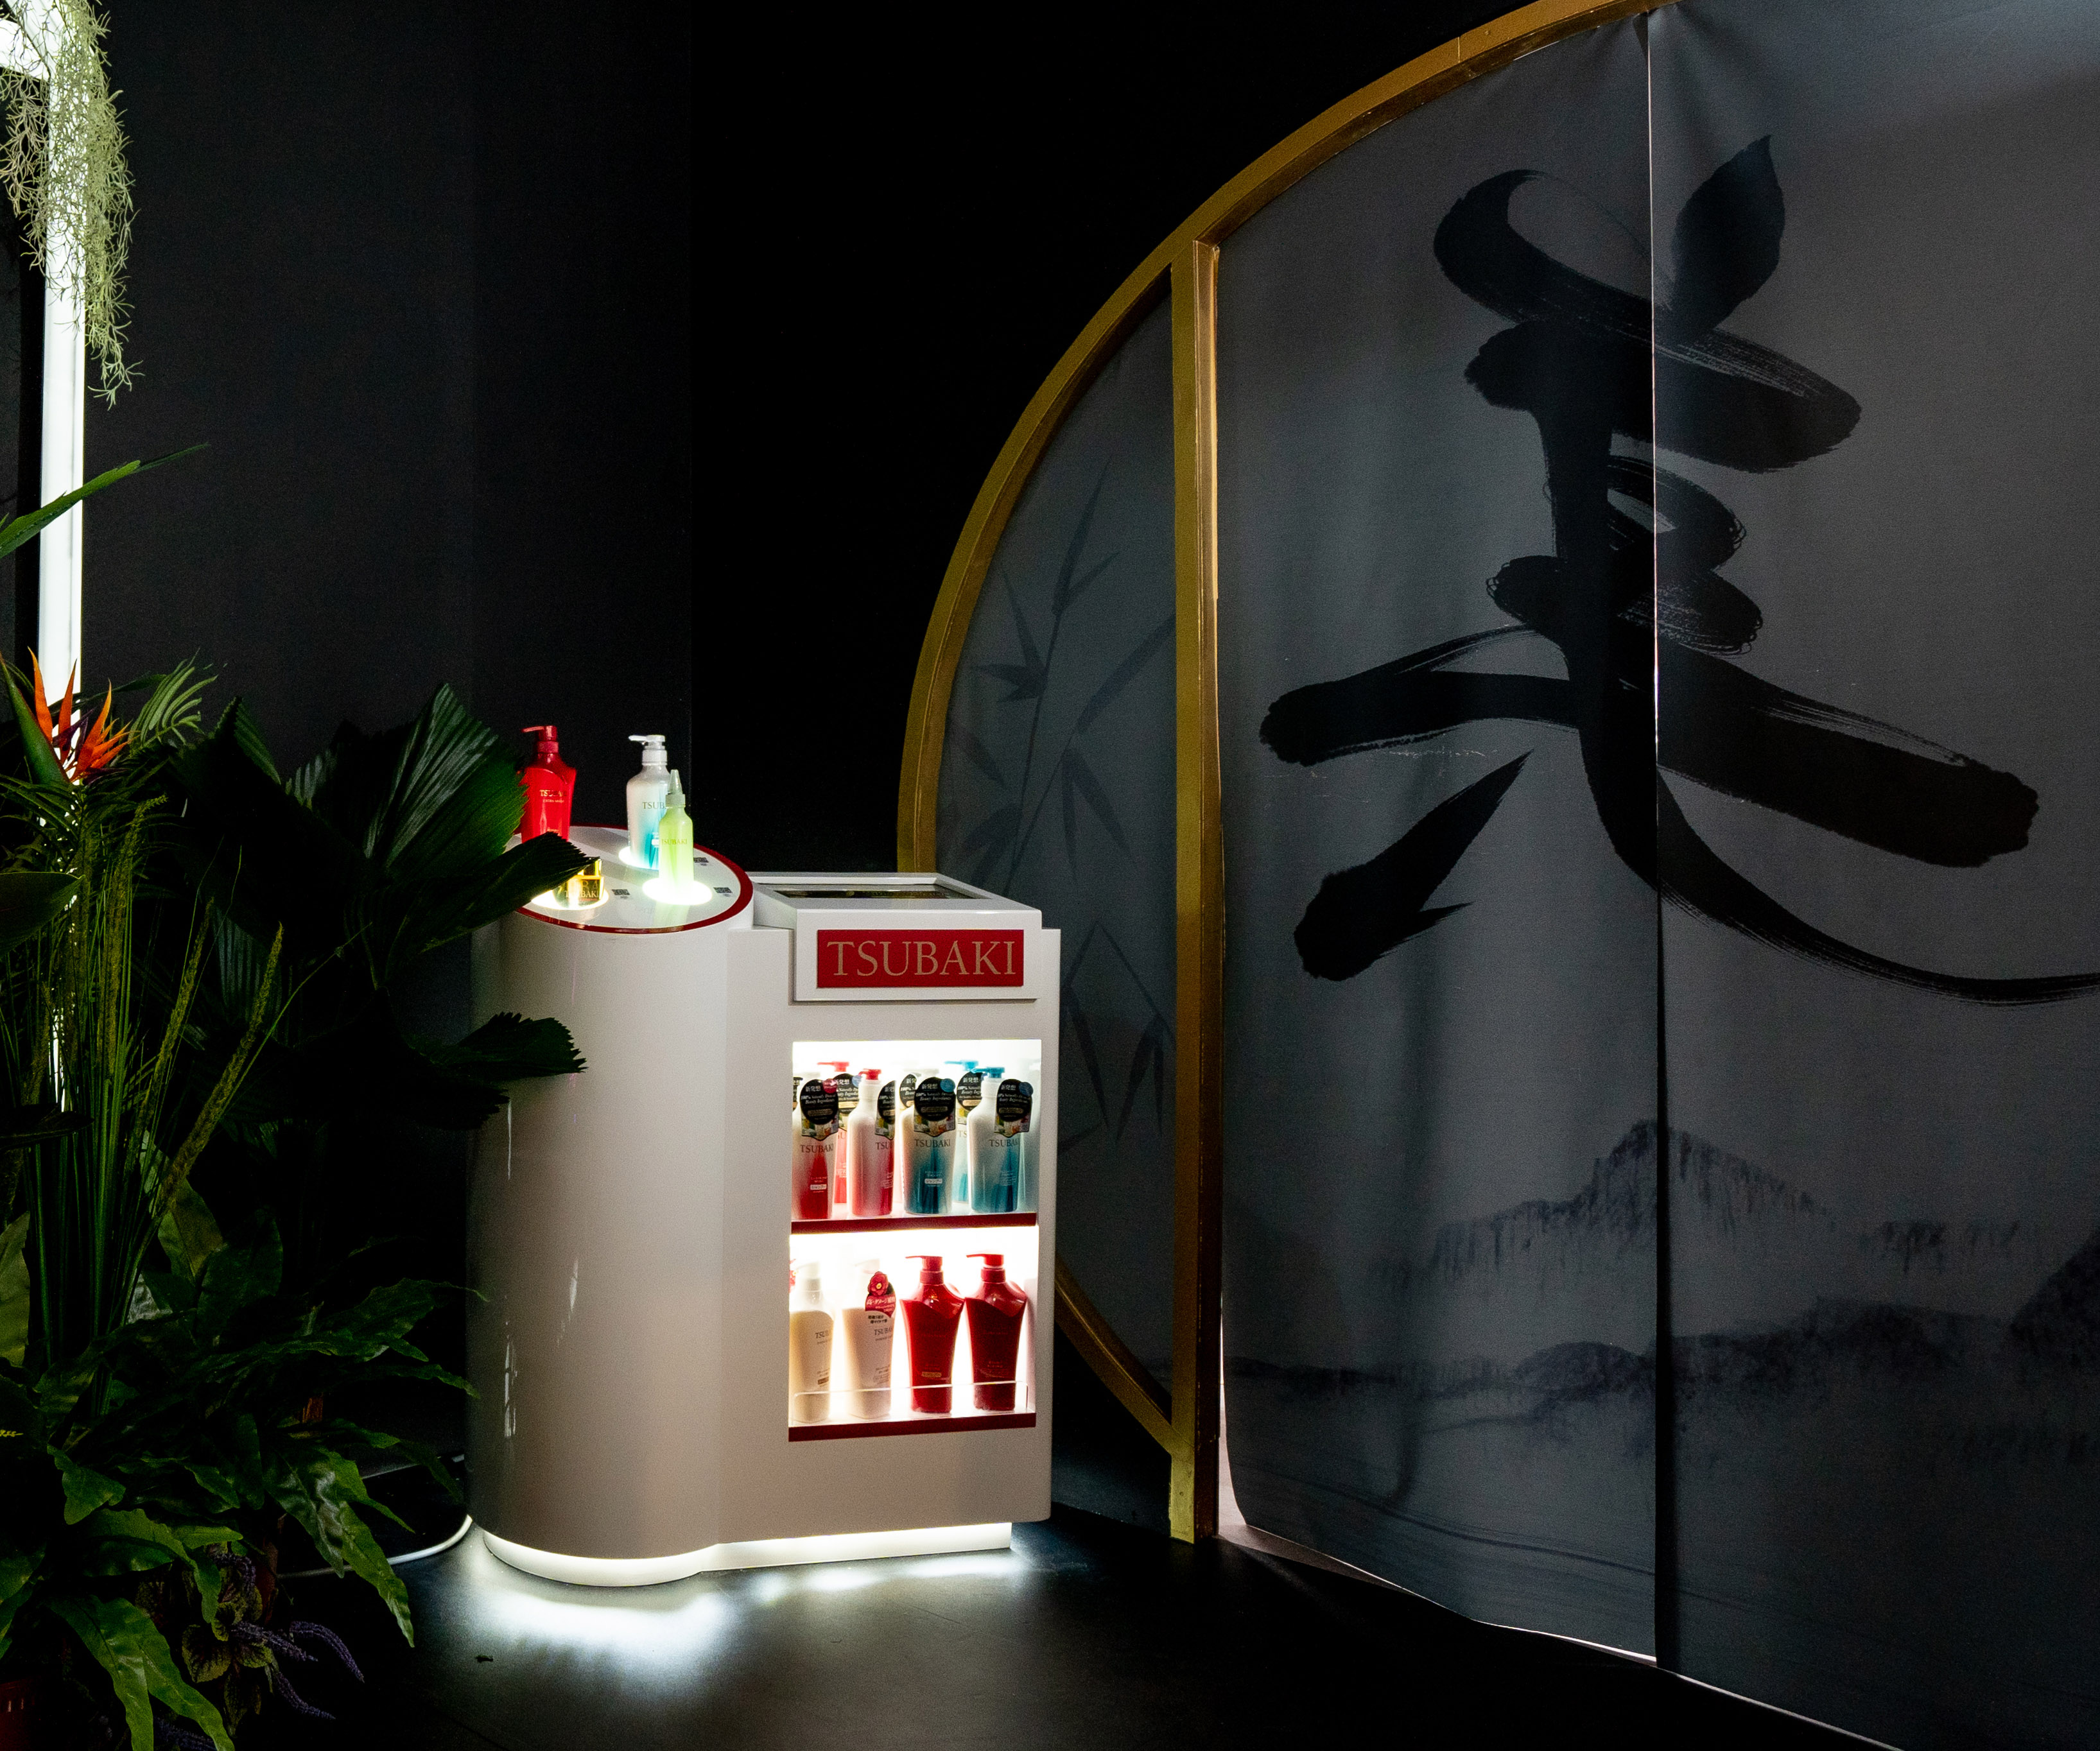 Shiseido My Japanese Beauty Pop-up Store is officially open – find it here - Alvinology